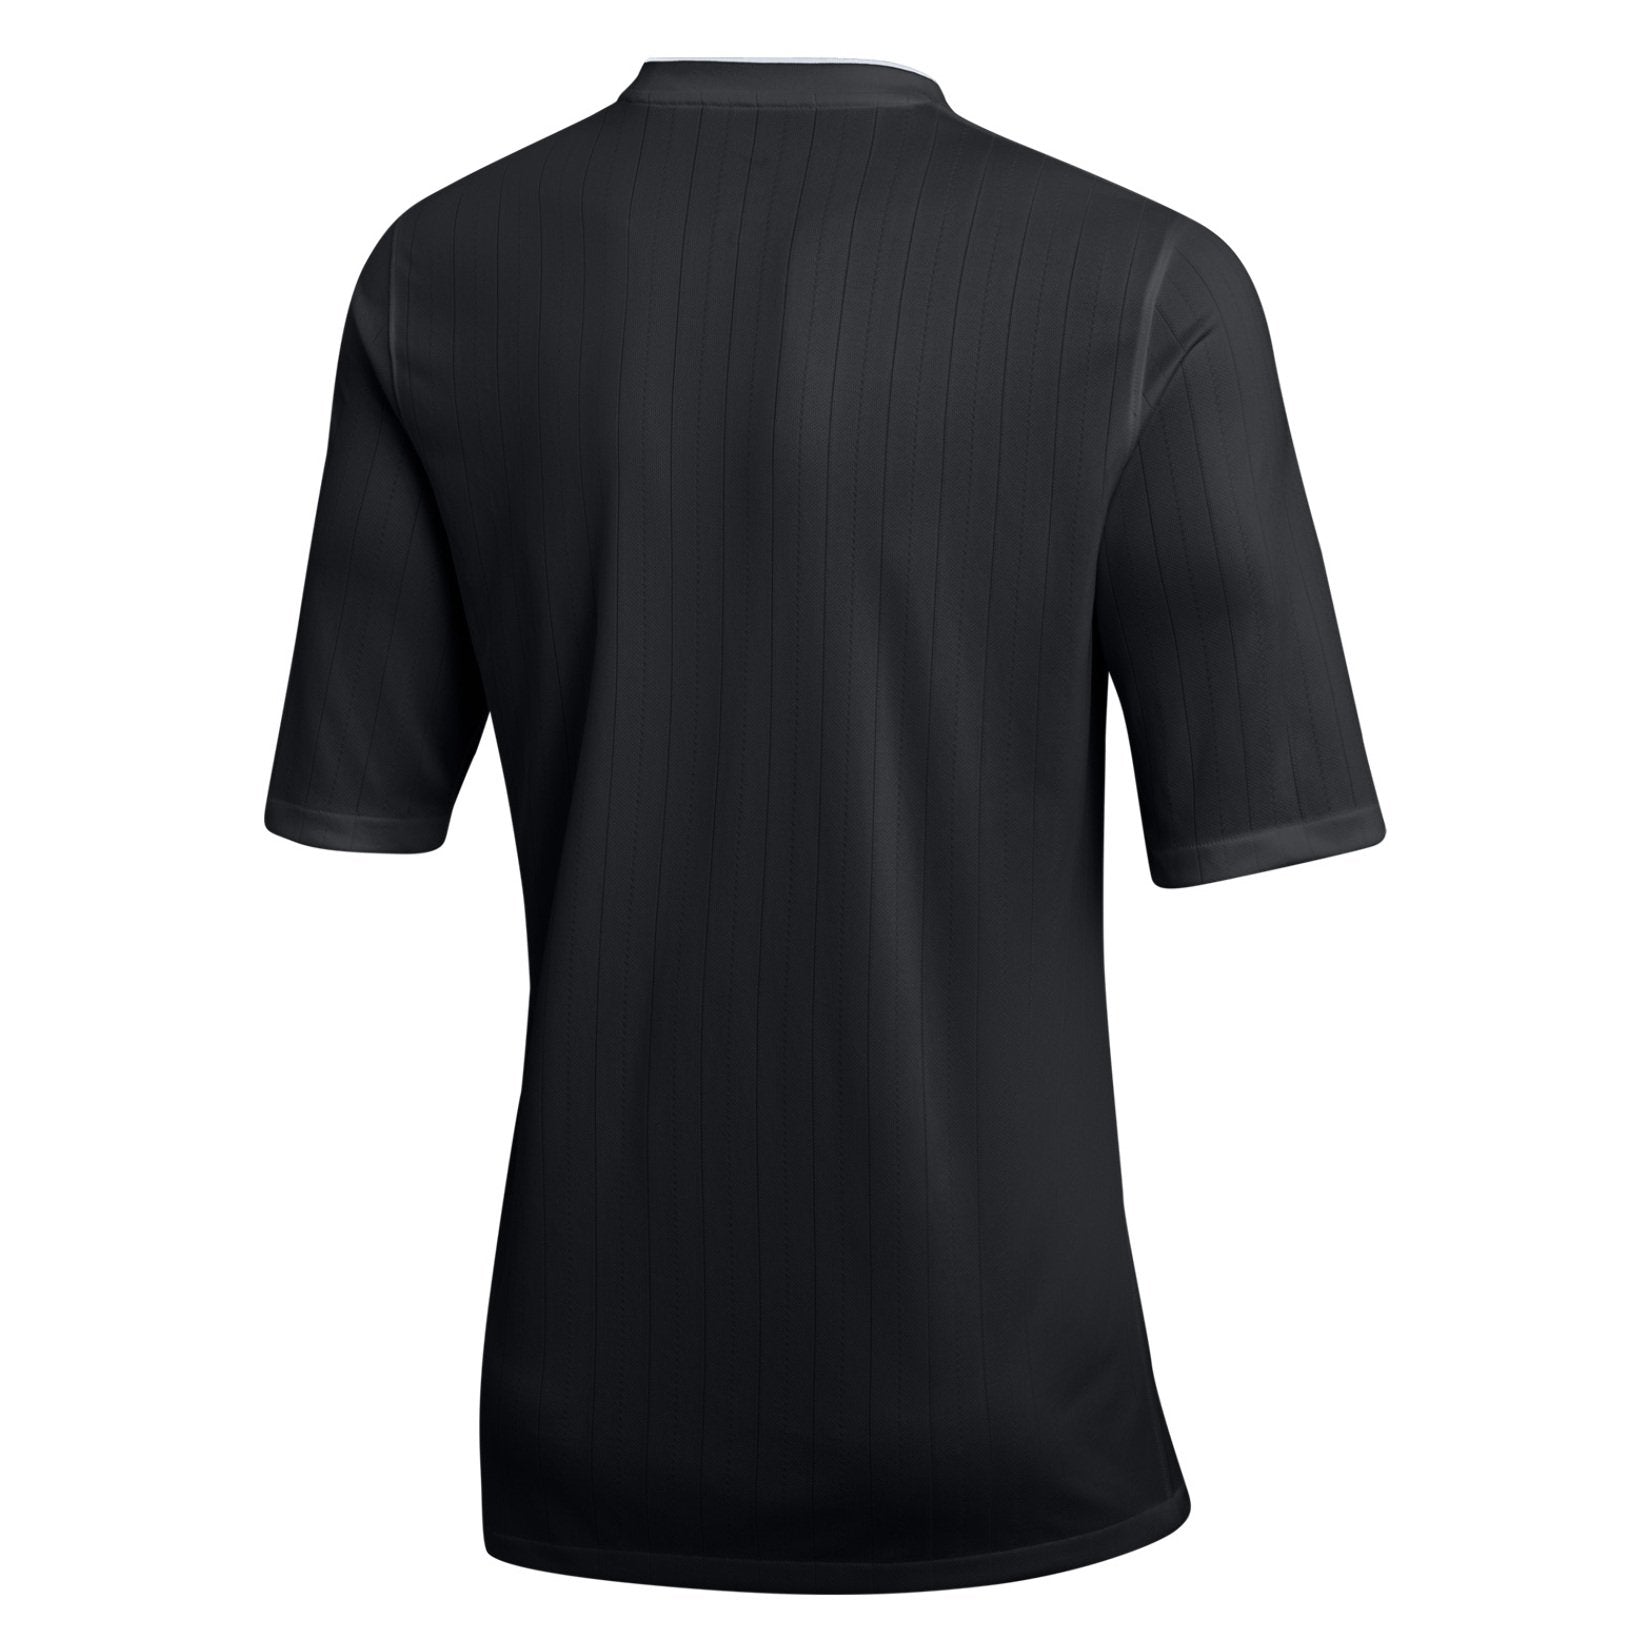 2022 Nike Referee Shirt (Short-Sleeved) – The Referee Store